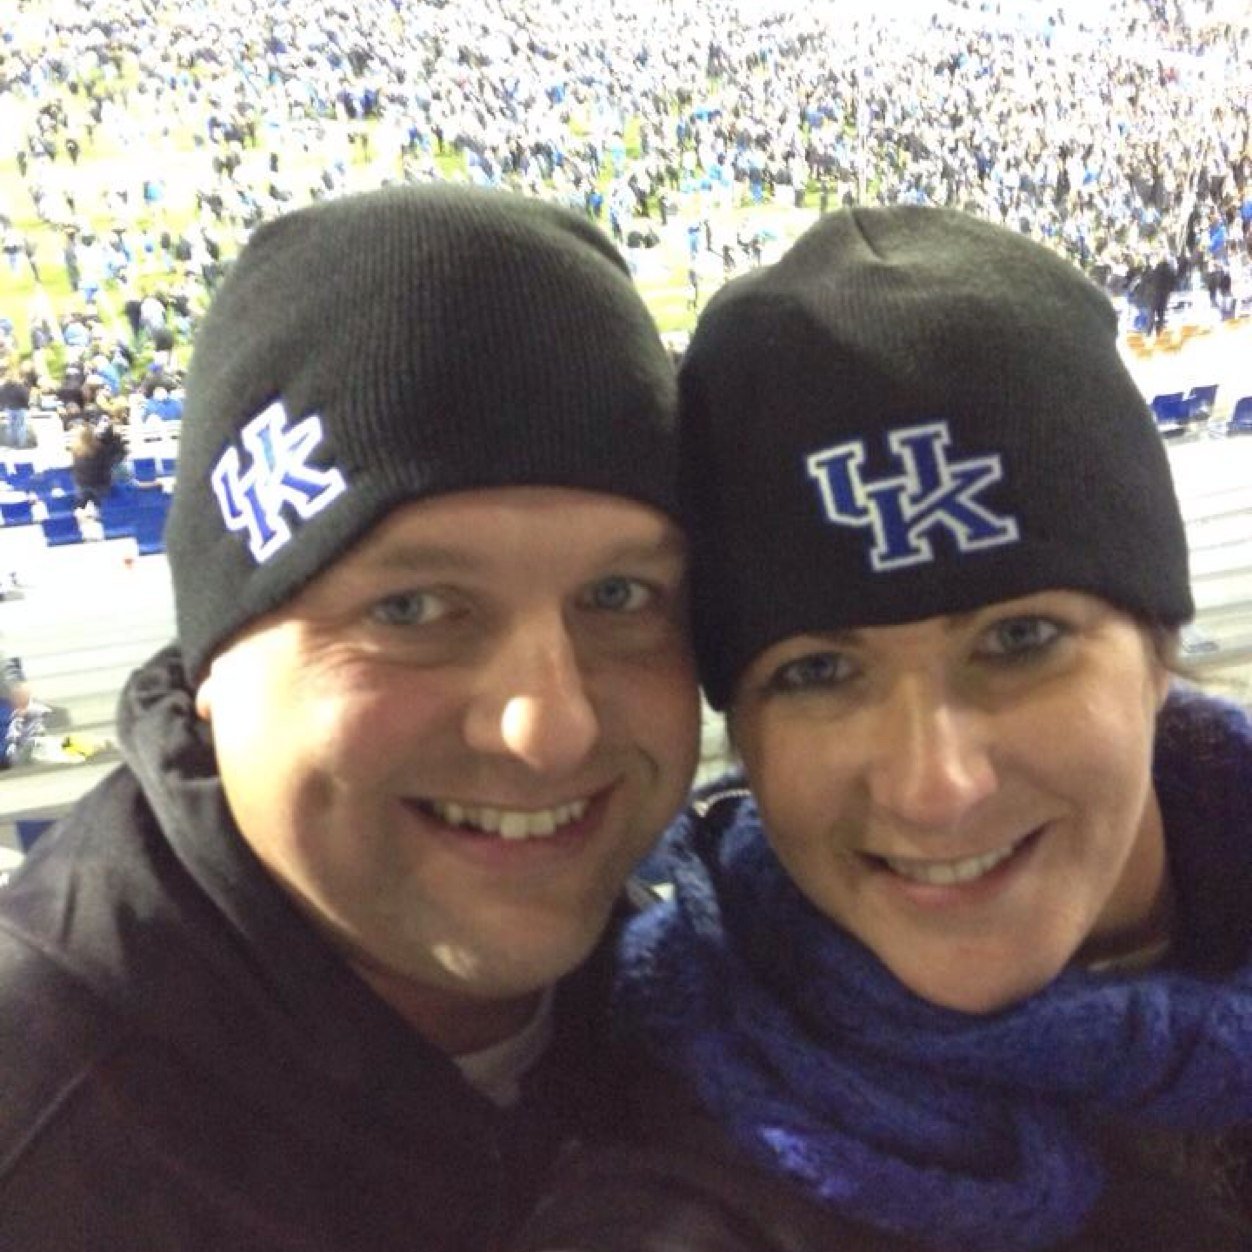 UK basketball and football fan. Fisher, hunter and guitar player. @kygirl41502 is deff my better half. Singer of songs (that's a work in progress).